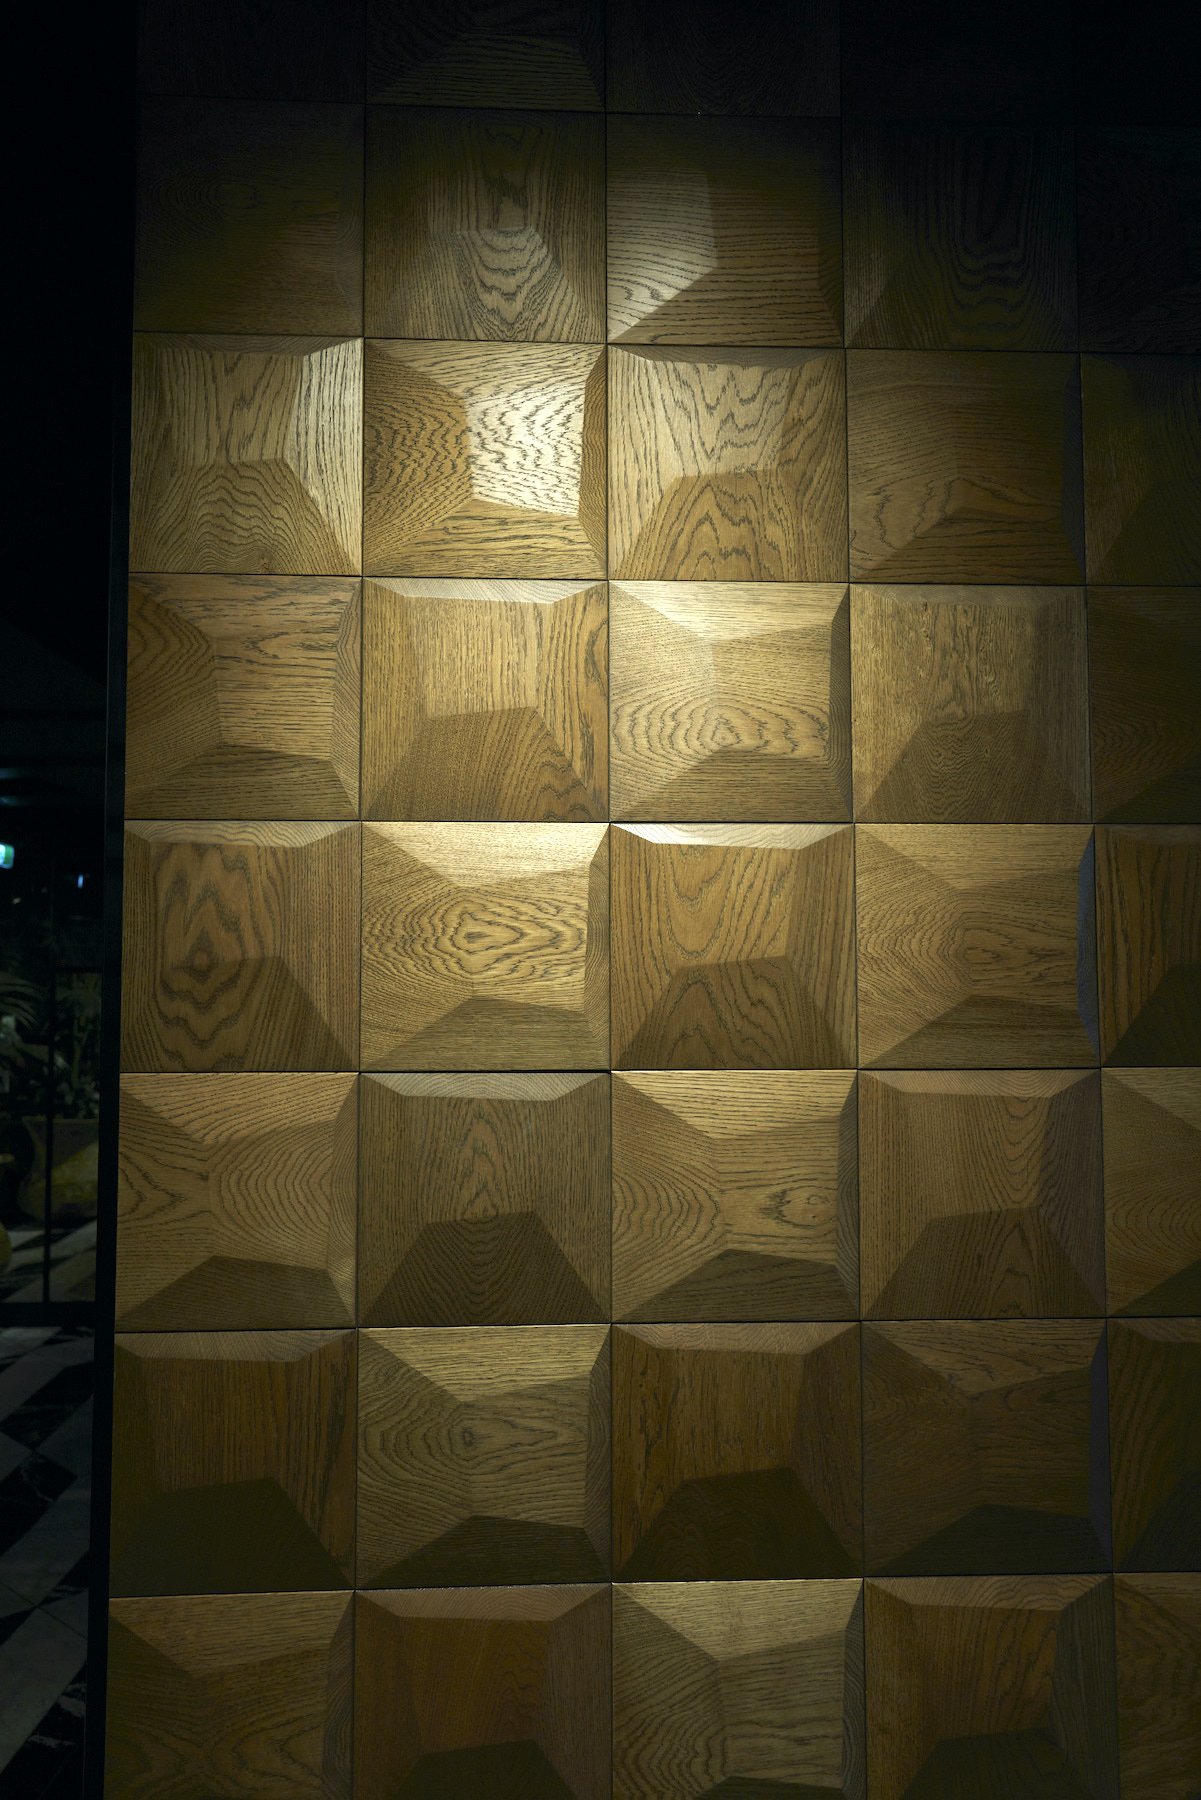 3D Decorative Wall Panelling feature wall in Restaurant interior